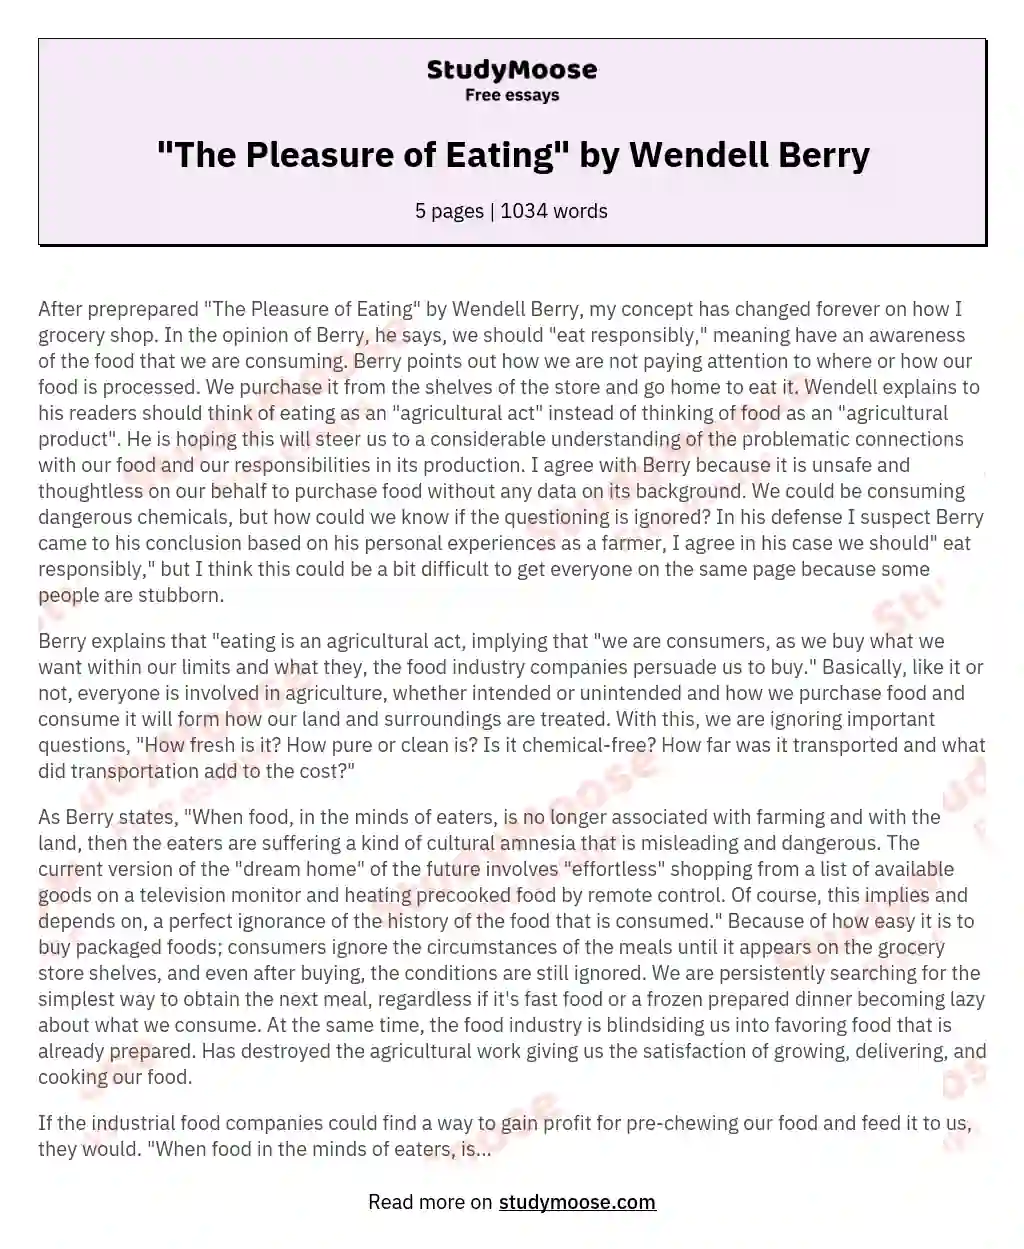 "The Pleasure of Eating" by Wendell Berry